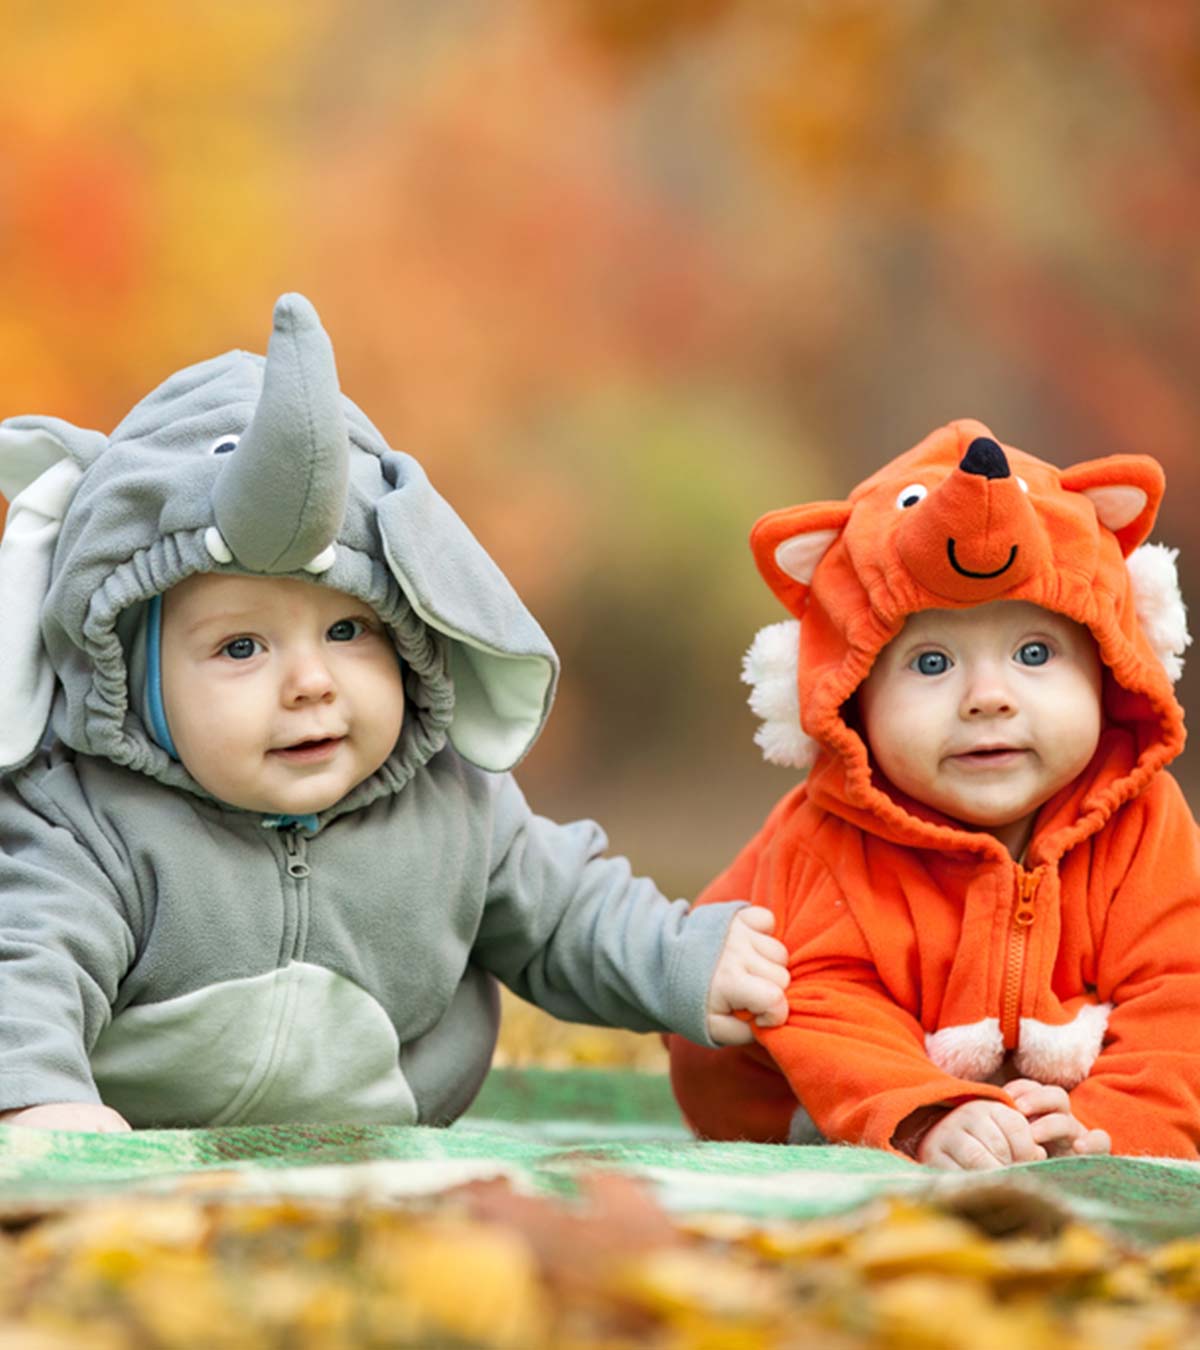 7 Of The Easiest Halloween Costumes You Can Make From Regular Clothes